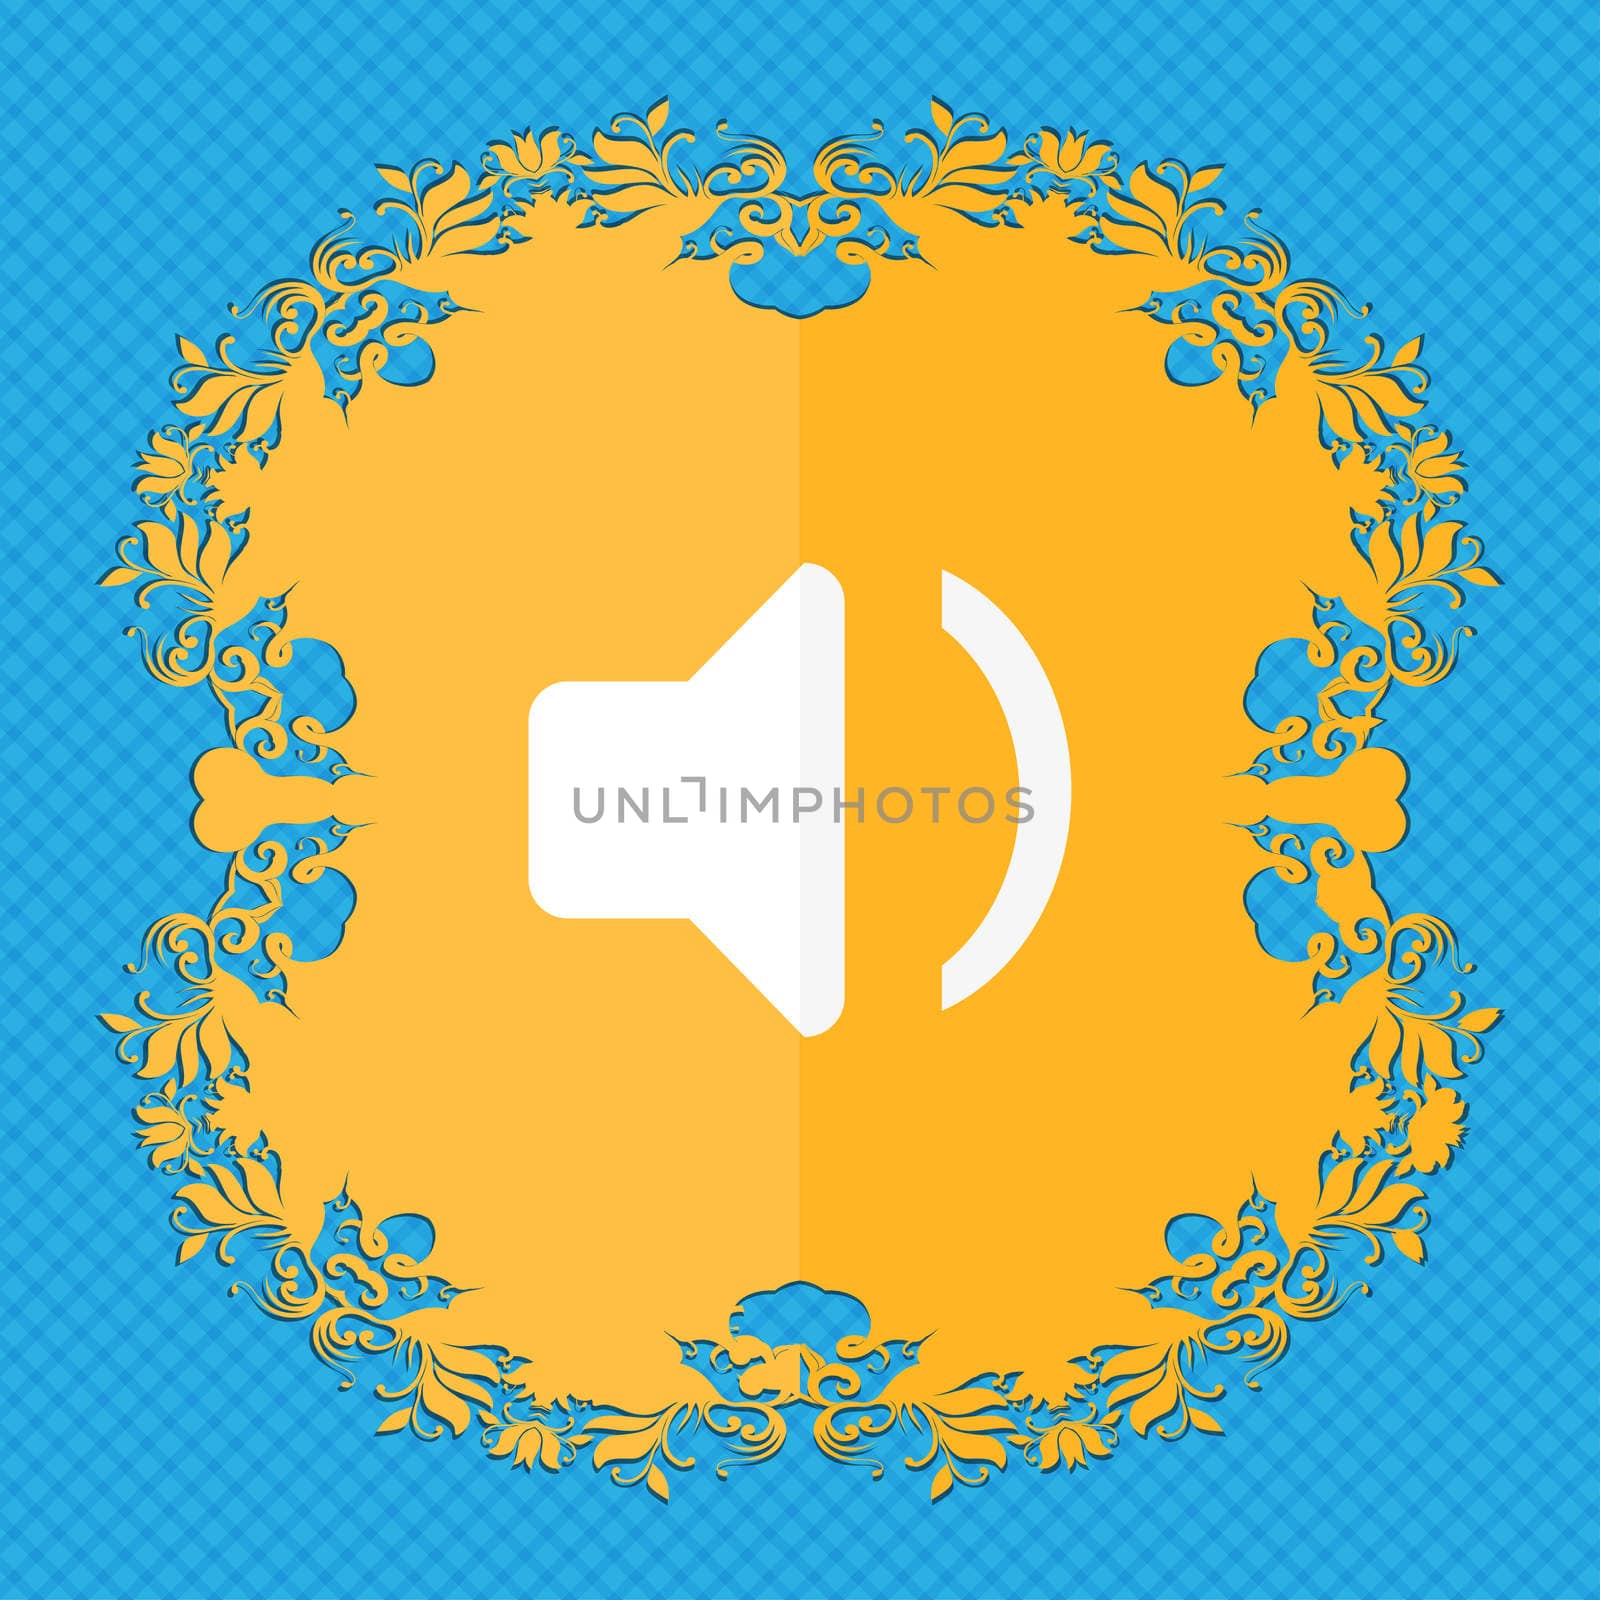 Speaker volume, Sound . Floral flat design on a blue abstract background with place for your text. illustration